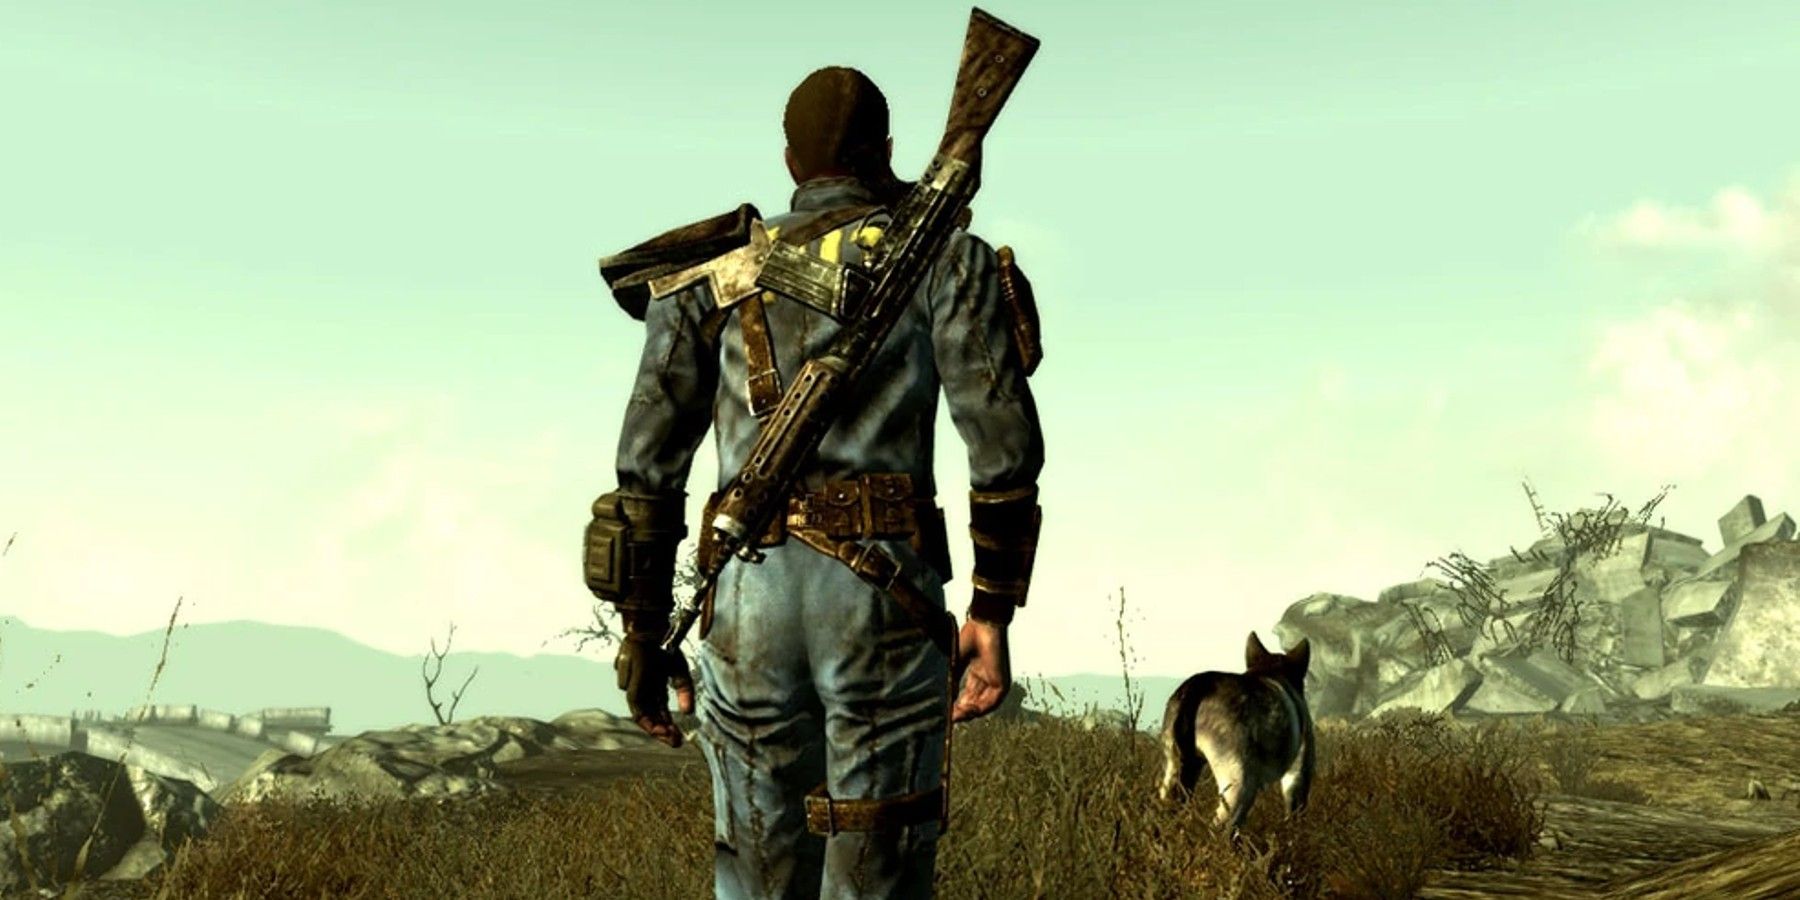 Fallout 3 protagonist the Lone Wanderer exploring the wastelands with Dogmeat